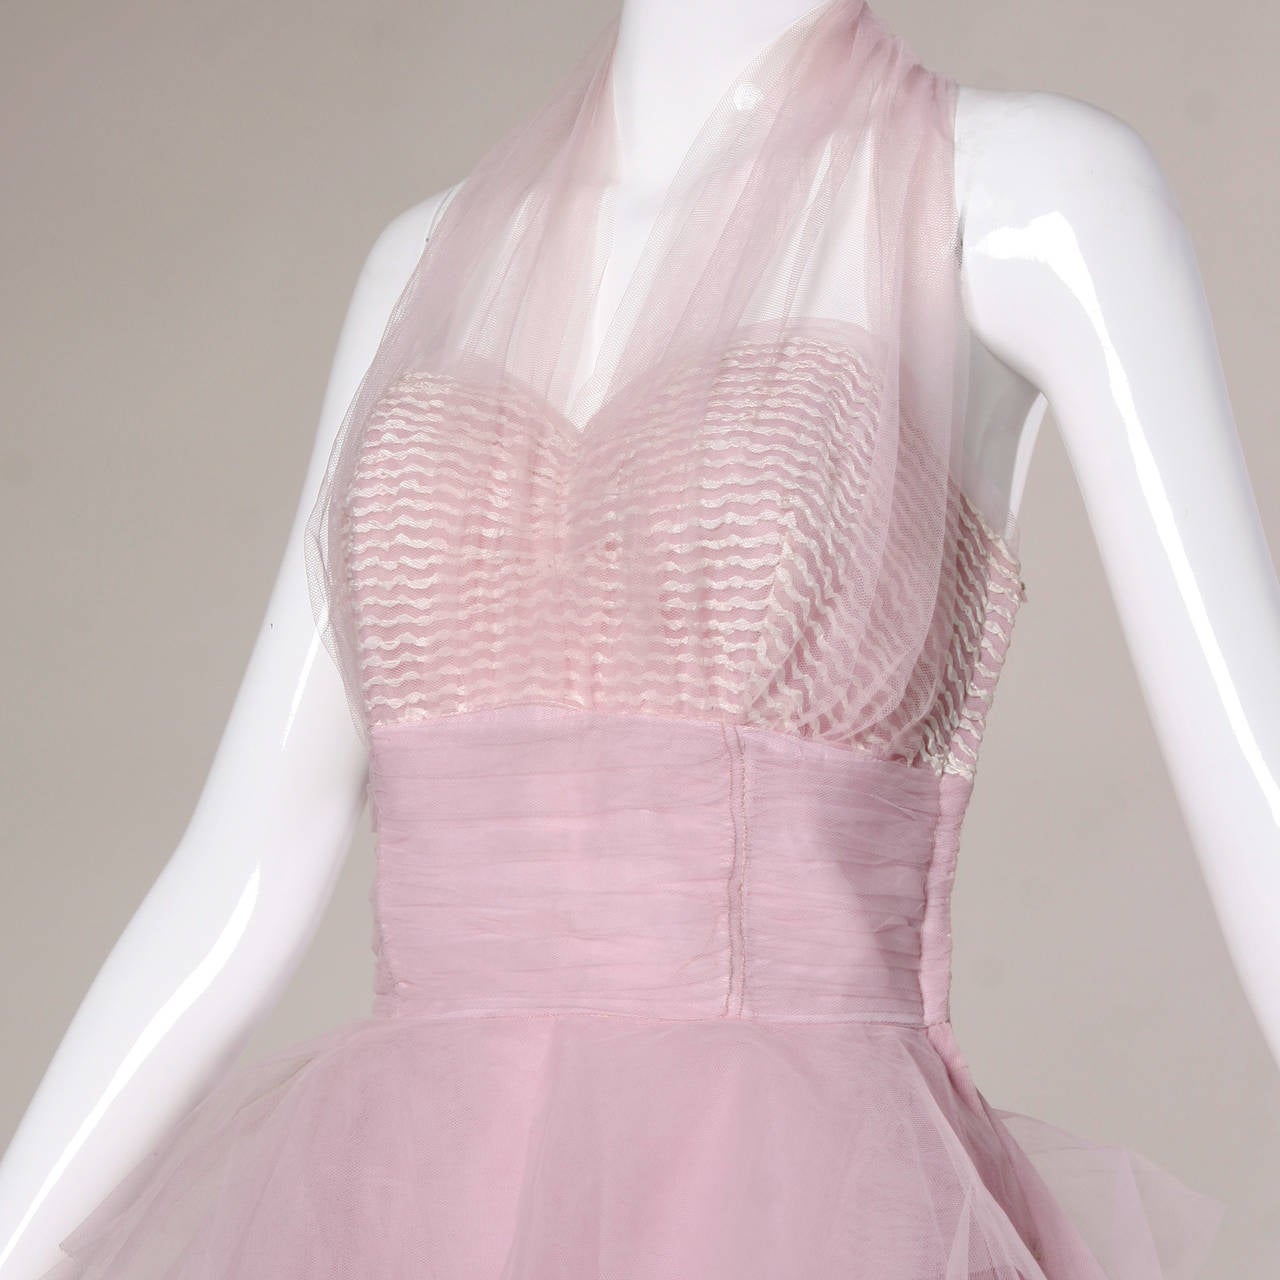 Very 1950s tulle formal dress with a poofy tiered skirt and halter neckline. 

Details:

Fully Lined
Side Metal Zip Snap and Hook Closure
Marked Size: Not Marked
Estimated Size: Small
Color: Pastel Pink-Purple/ White
Fabric: Tulle
Label: Not